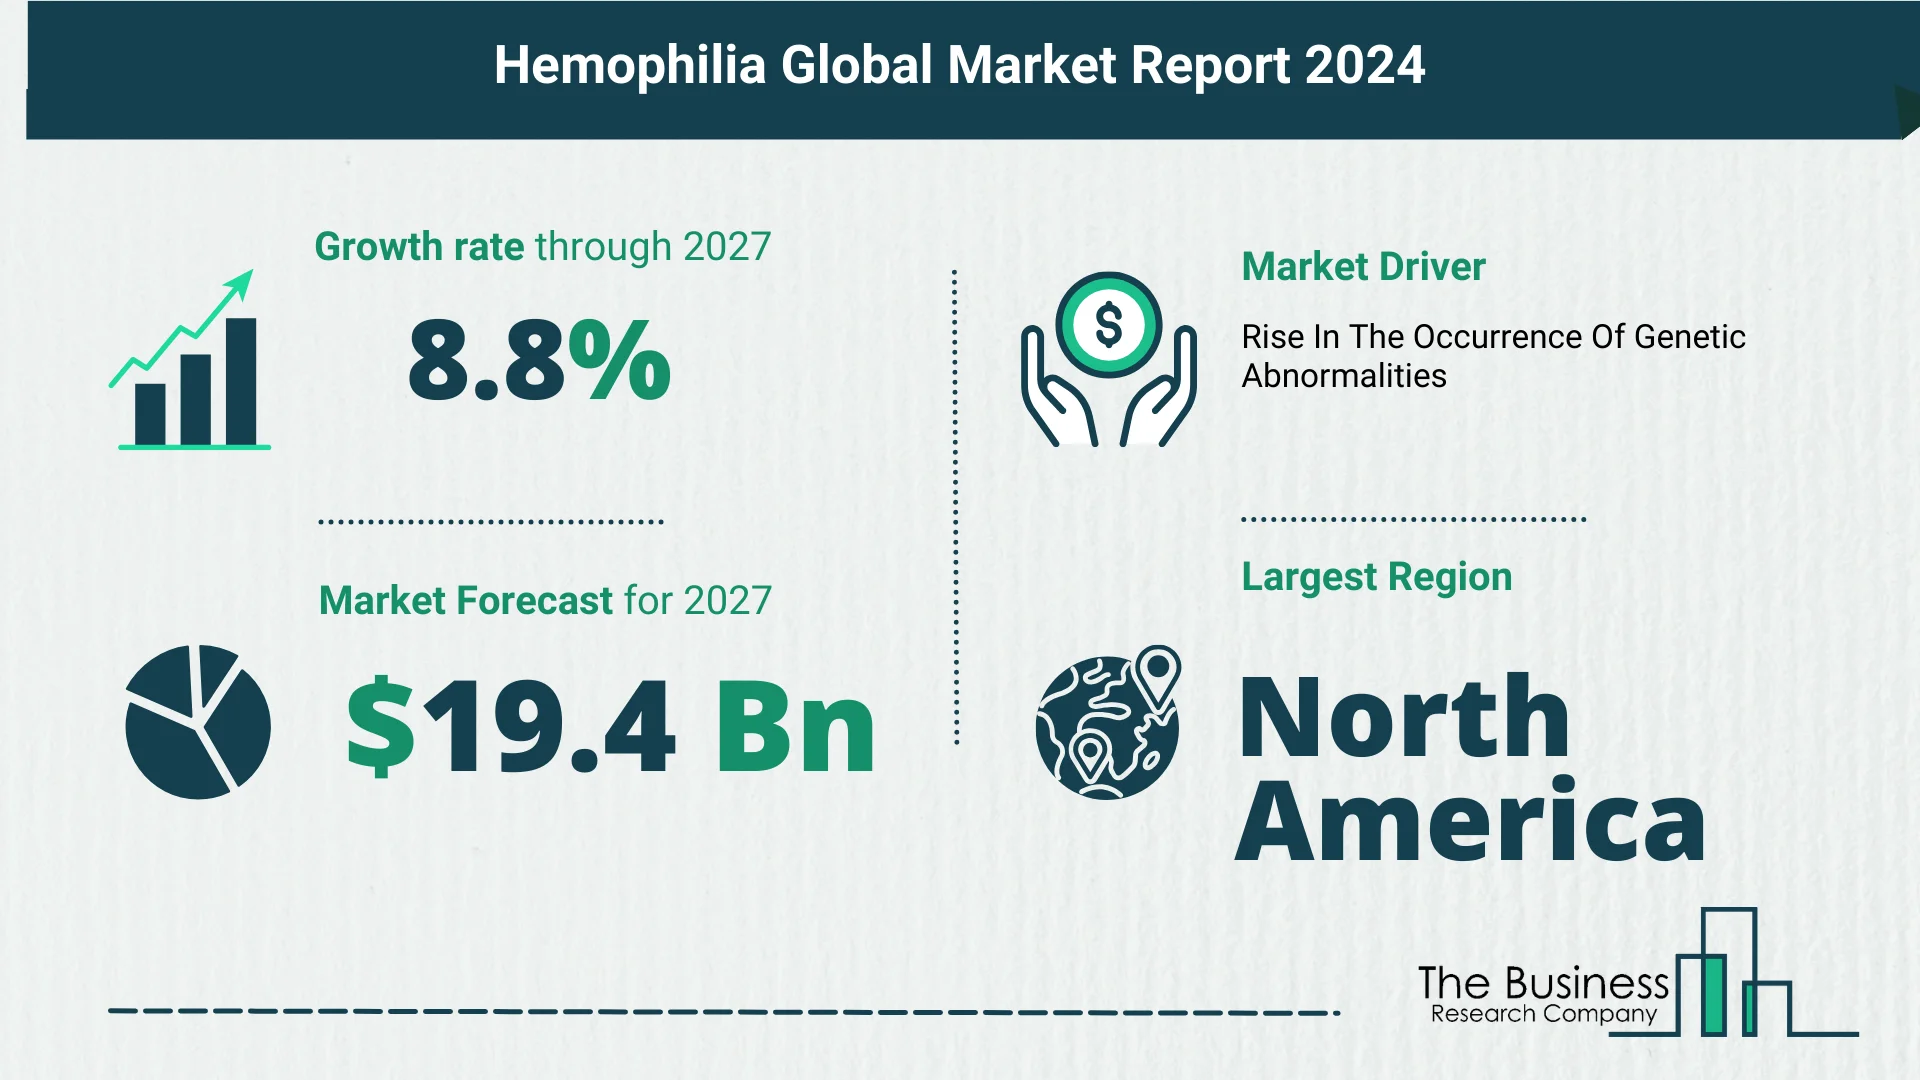 Top 5 Insights From The Hemophilia Market Report 2024